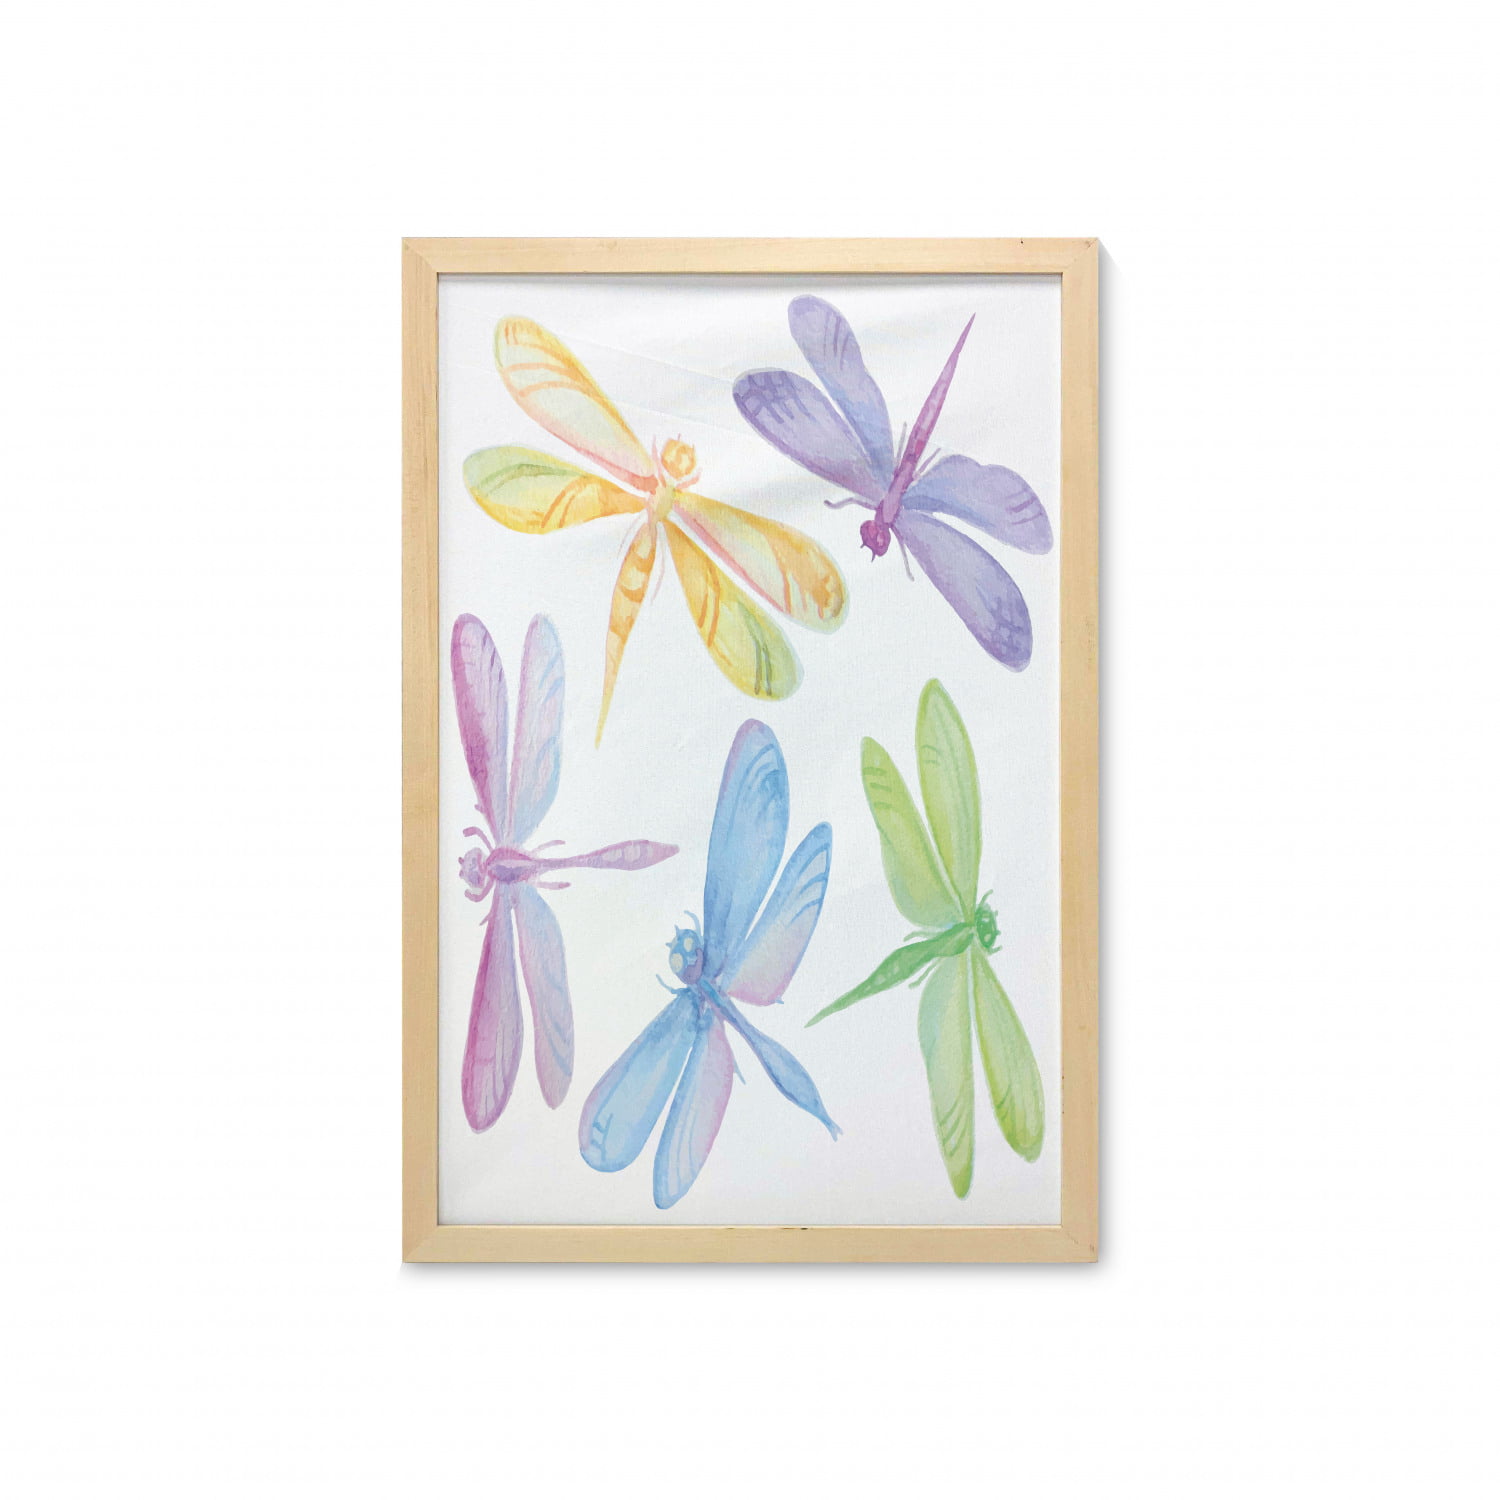 Glass Picture Frame Dragonfly Decoration With Frills 17x22cm image 10x15 cm Valentines 